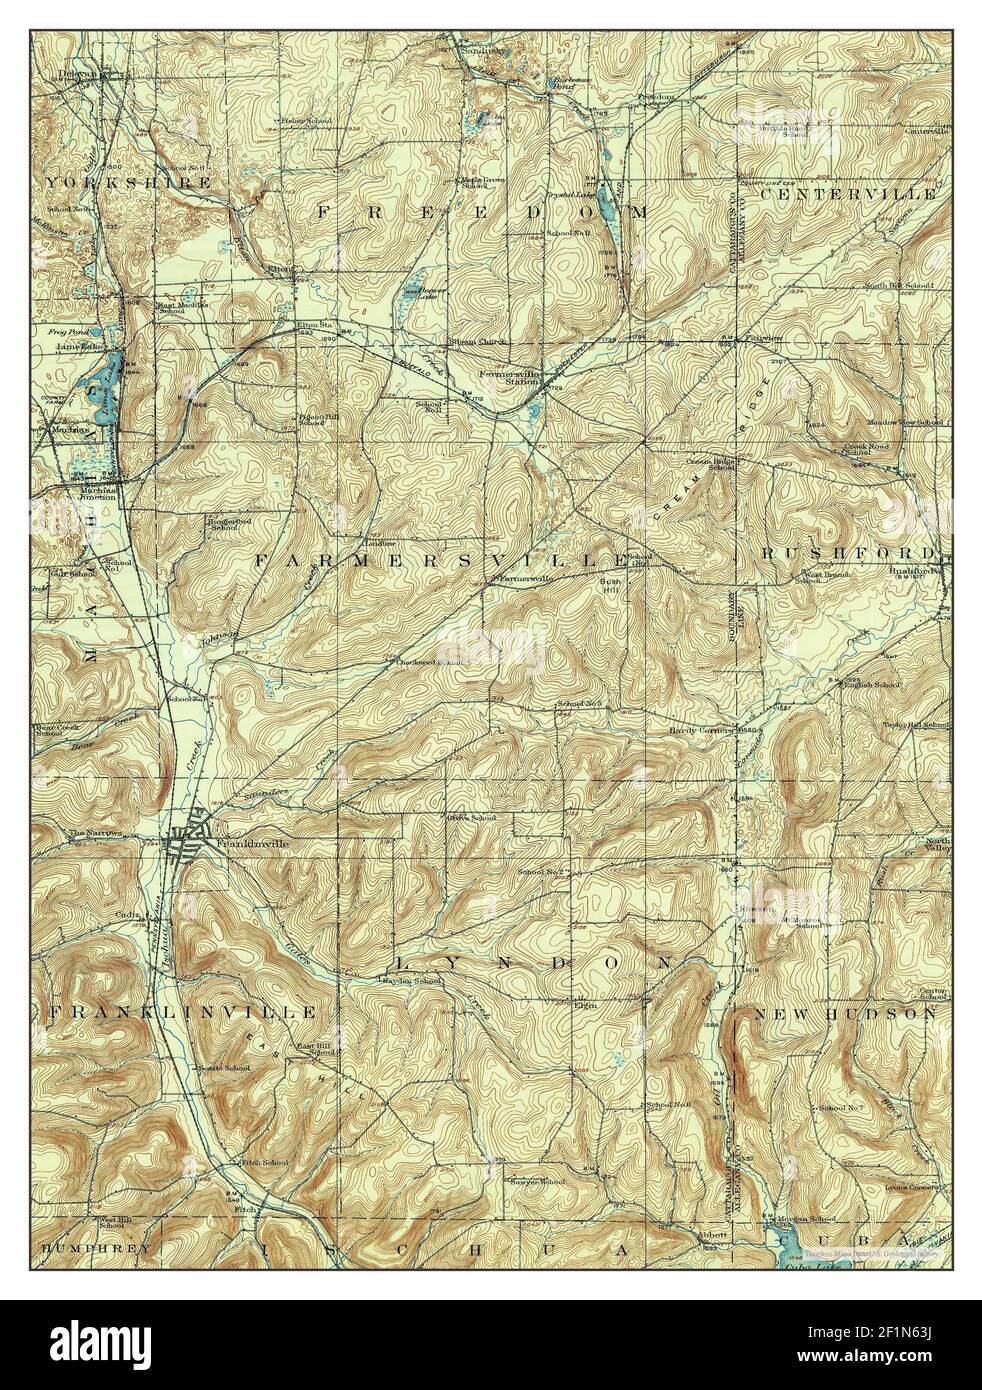 Franklinville, New York, map 1924, 1:62500, United States of America by Timeless Maps, data U.S. Geological Survey Stock Photo